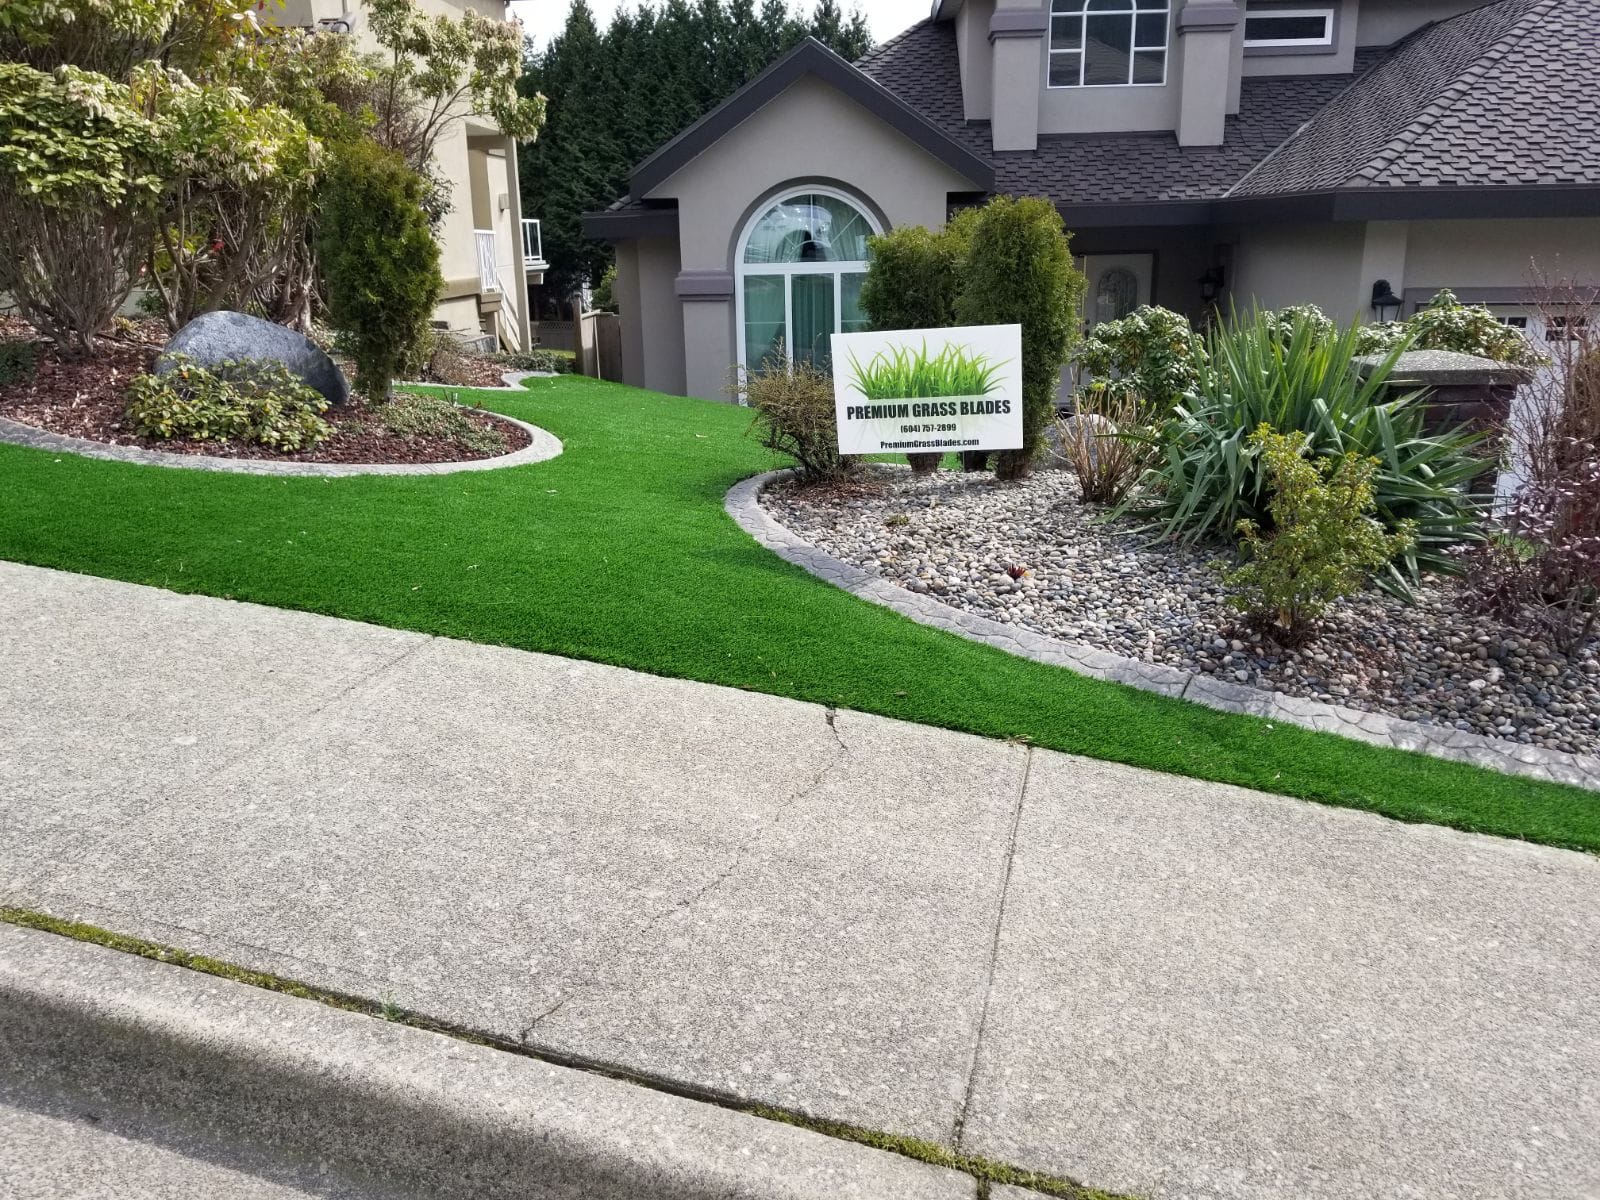 Premium Grass Blades Synthetic Artificial Turf Lush in Coquitlam with natural rock garden- Low Maintainance